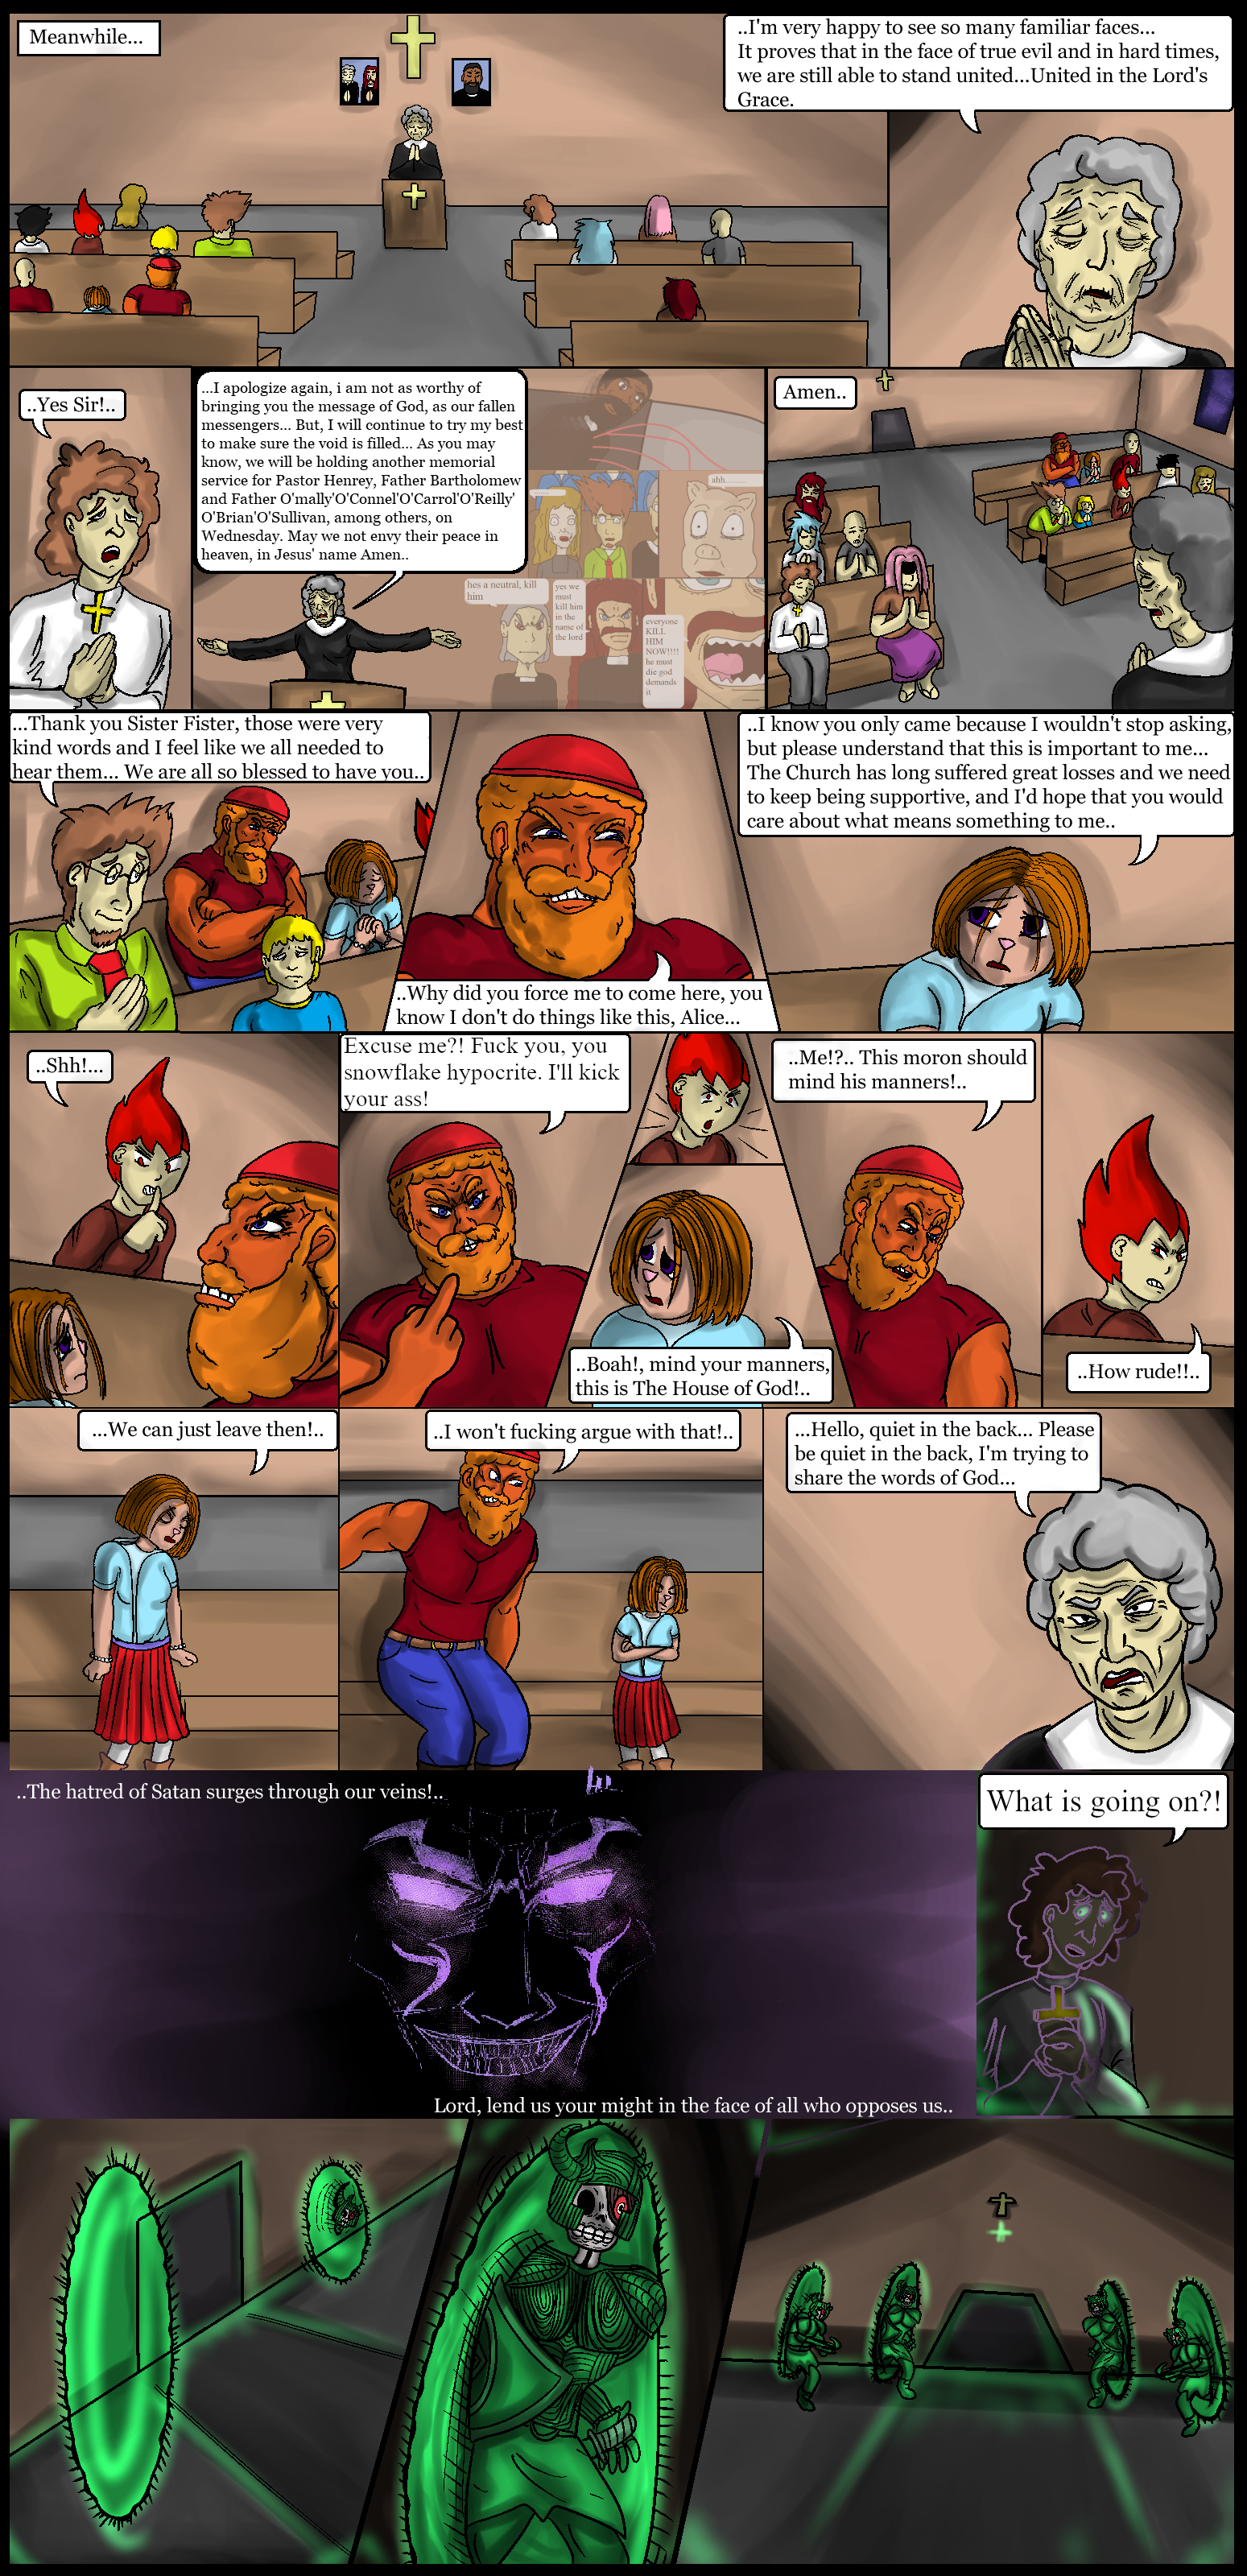 ch25.5/pg1.png. If you're seeing this, enable images. Or, perhaps we have a website issue. Try refreshing, if unsuccessful email commodorian@tailsgetstrolled.org with a detailed description of how you got here.